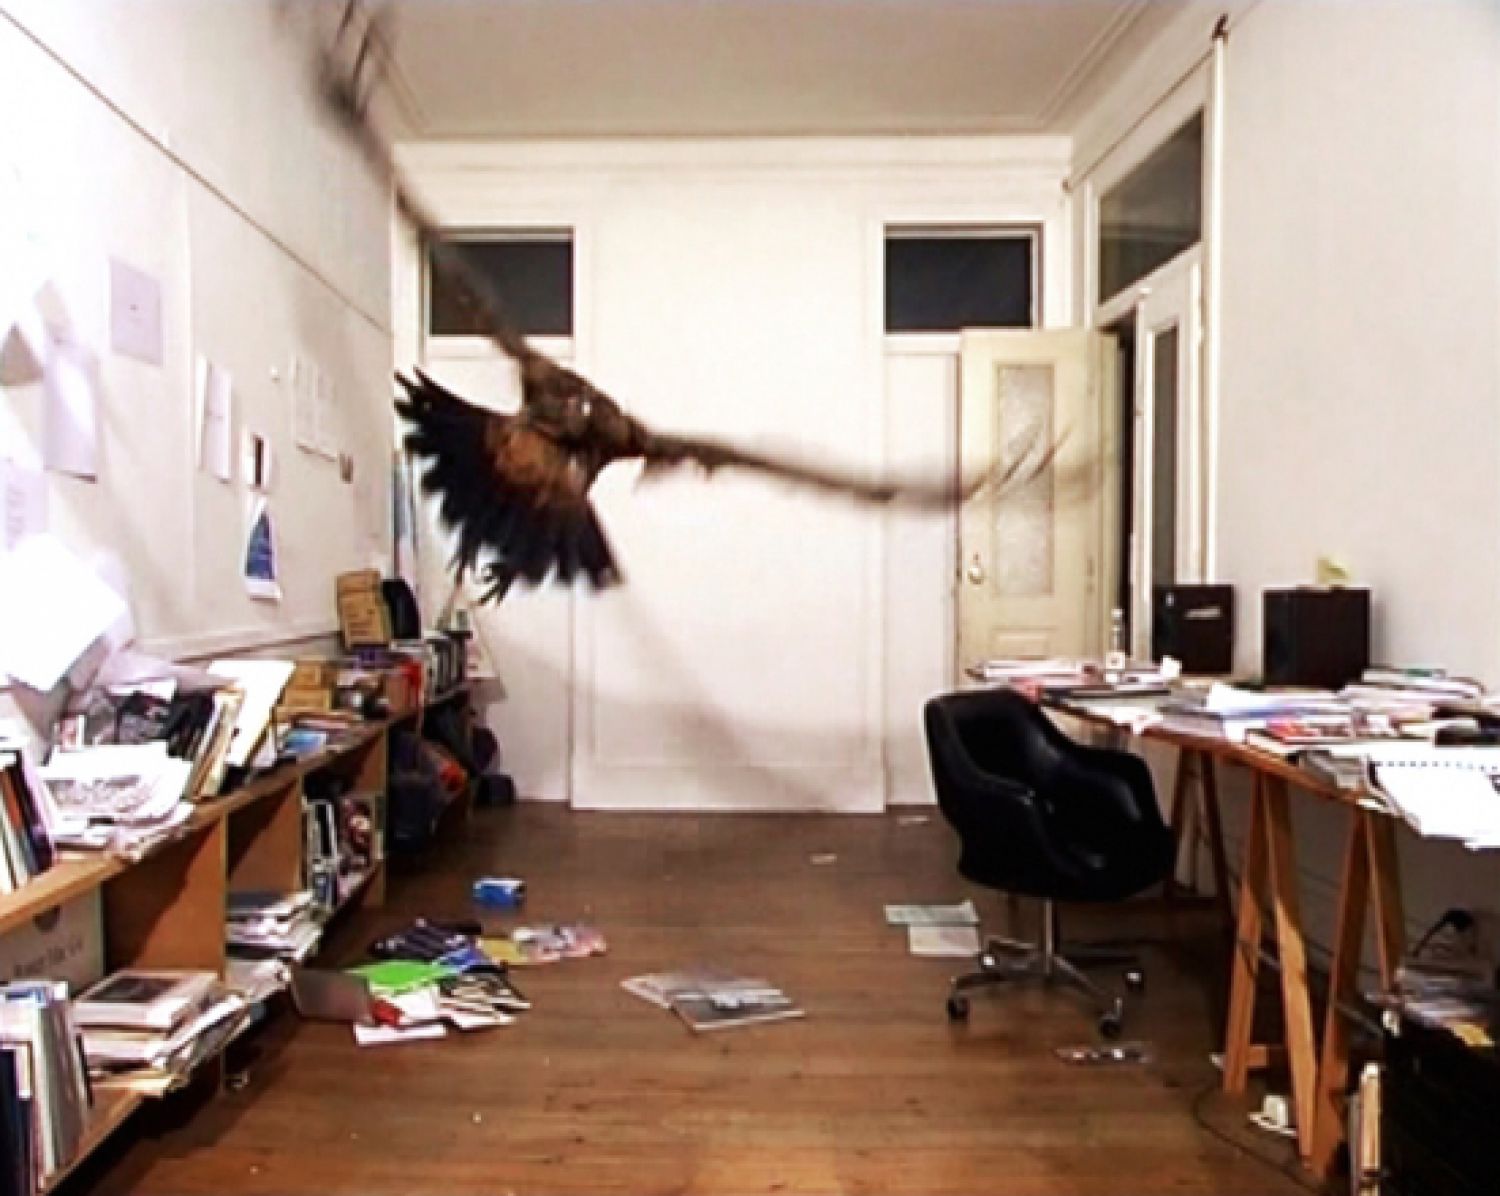 João Onofre, «Untitled (Vulture in the studio)», 2002